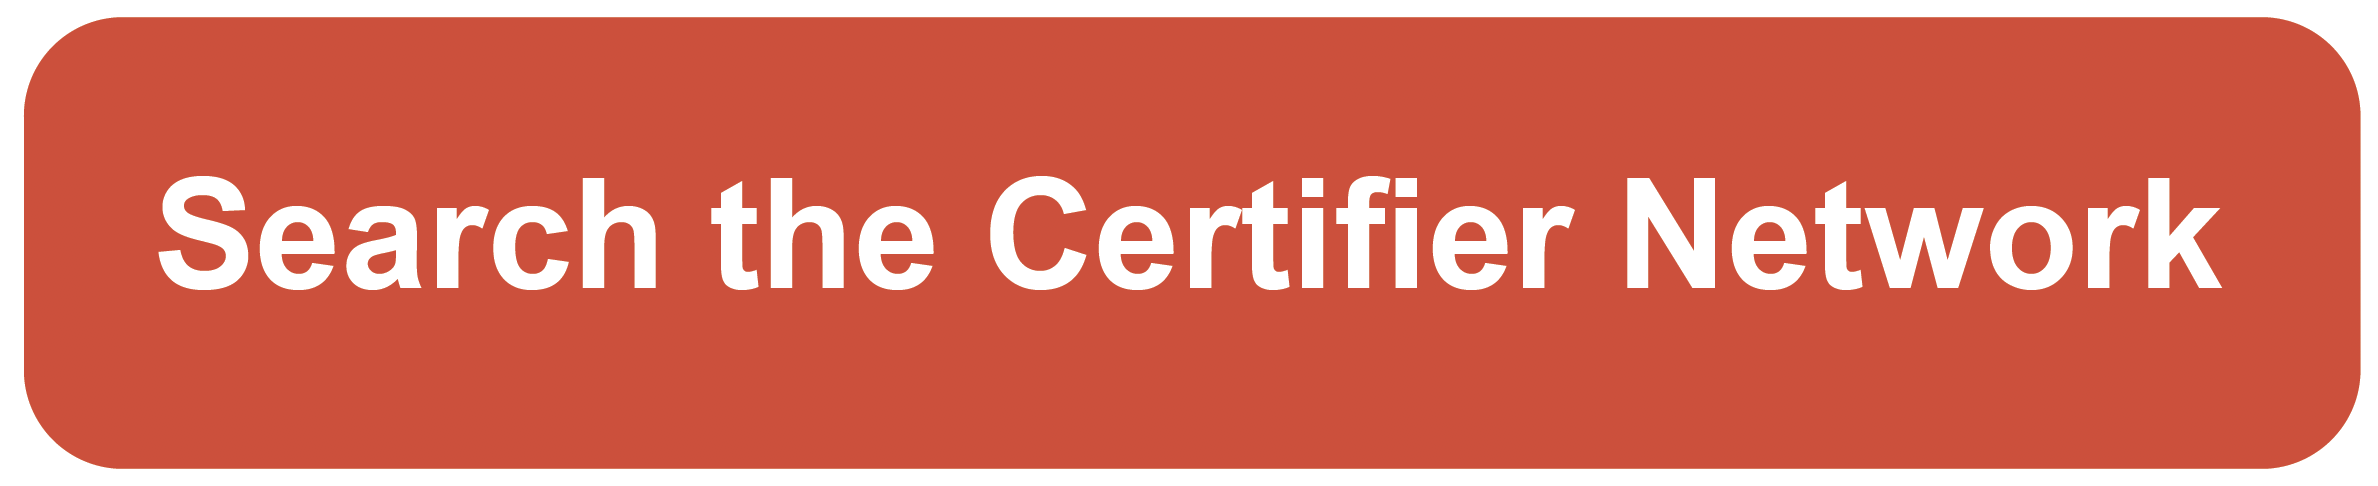 Search the Certifier Network